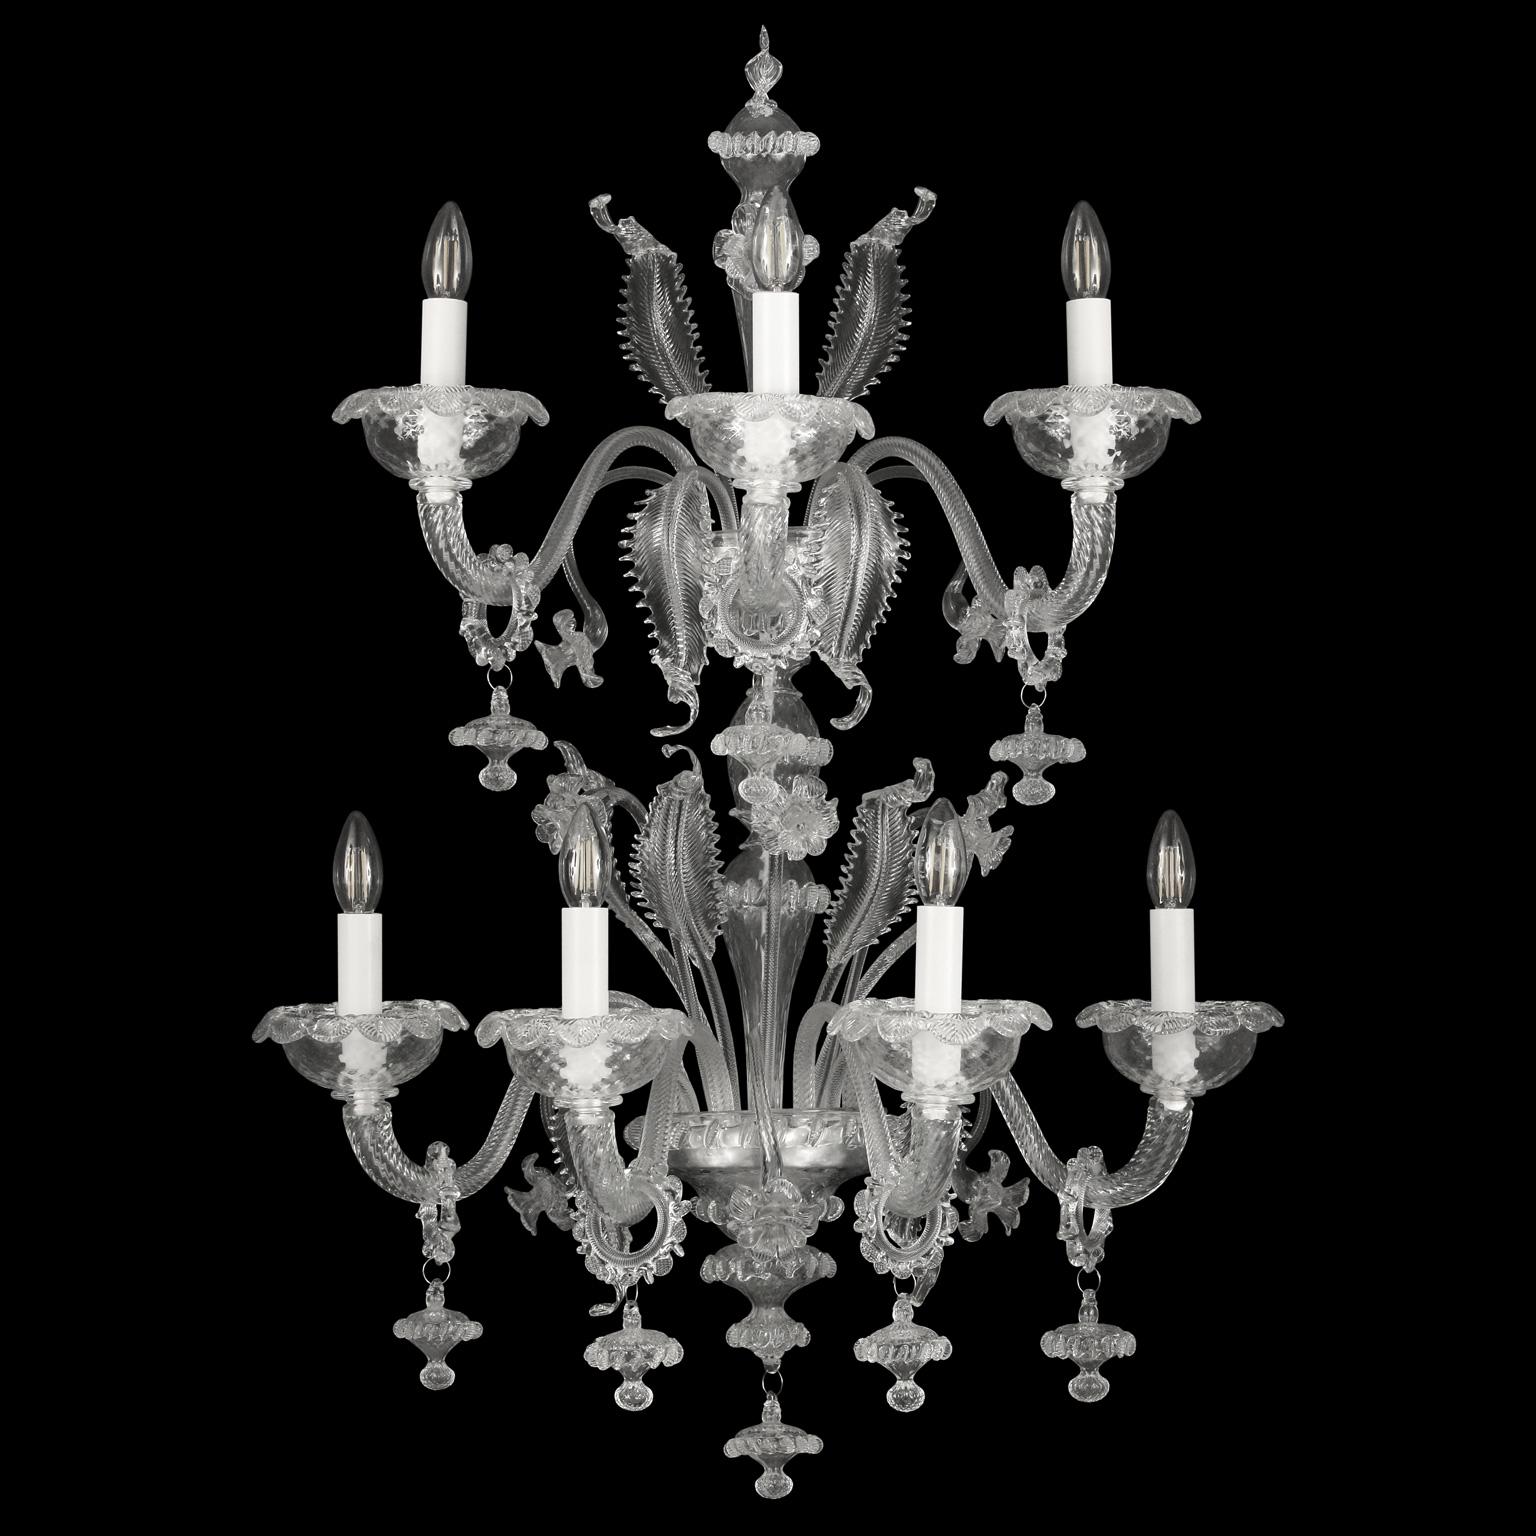 Caesar wall 4+3 lights, Venetian style, double tier in clear blown artistic glass by Multiforme
The name, as well as the structure evokes the splendour of the past centuries. It is an evergreen model, a classic product manufactured by our skilled